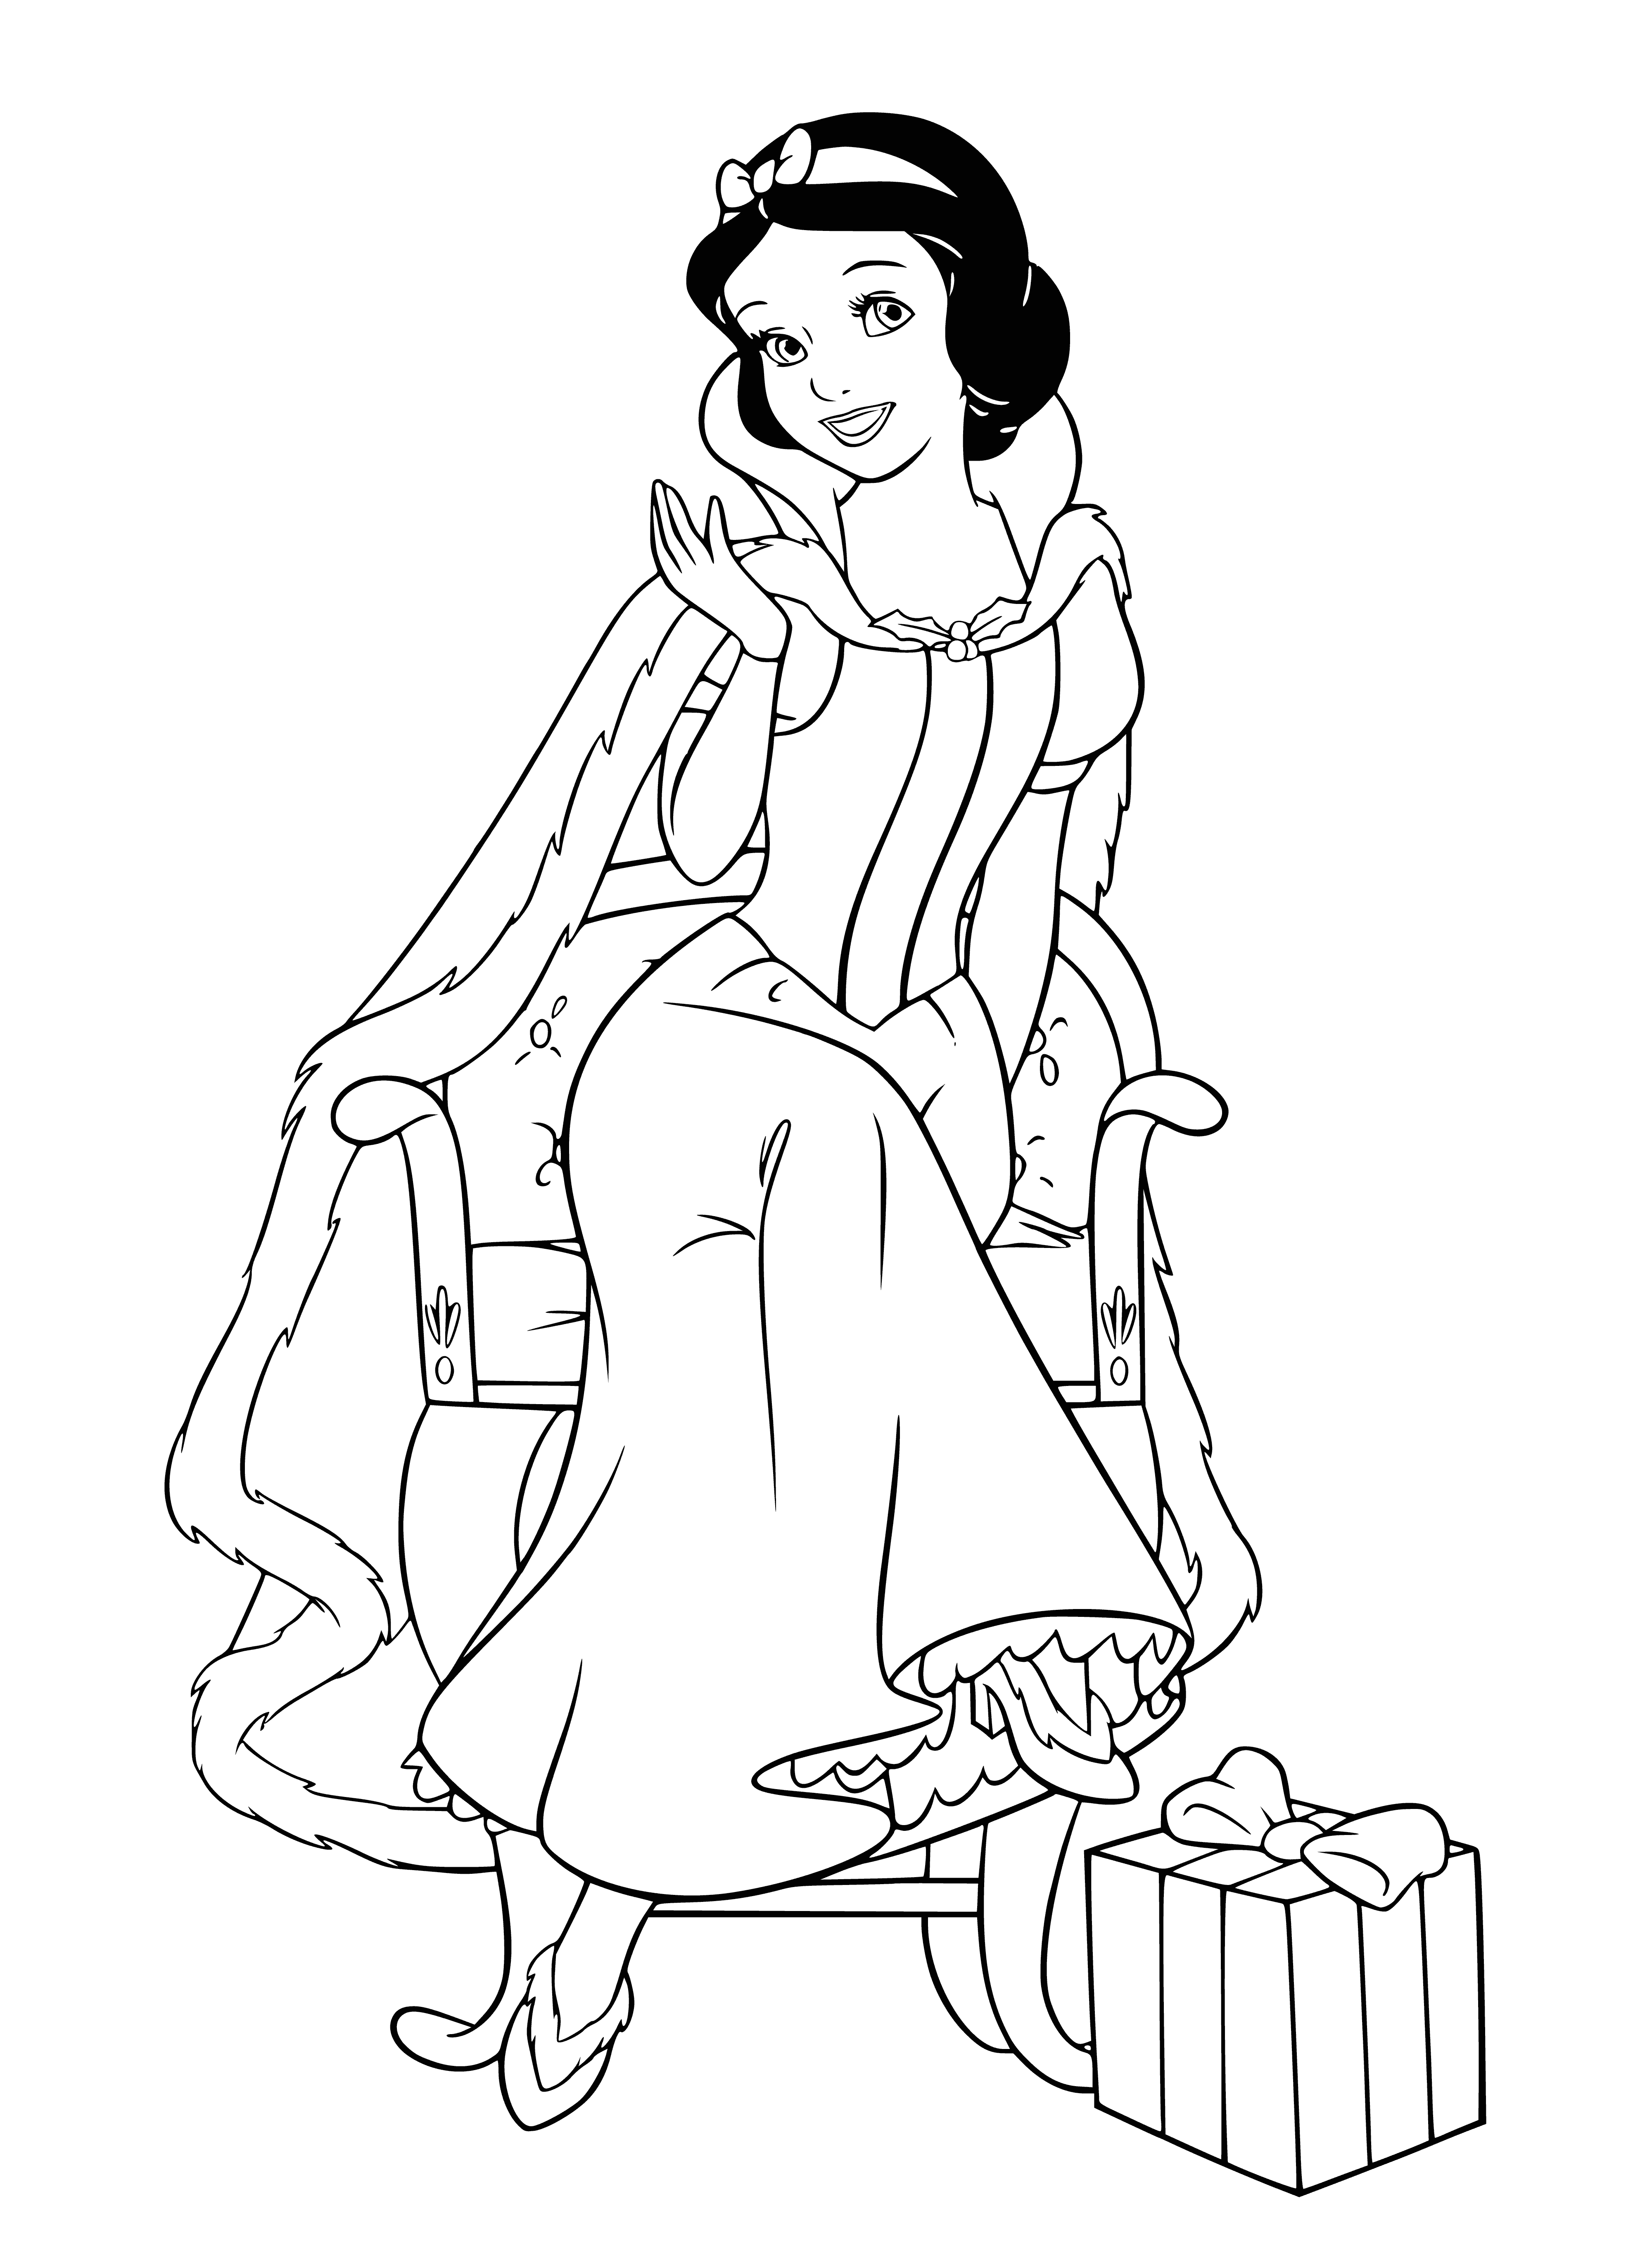 Snow White and New Year's Gift coloring page